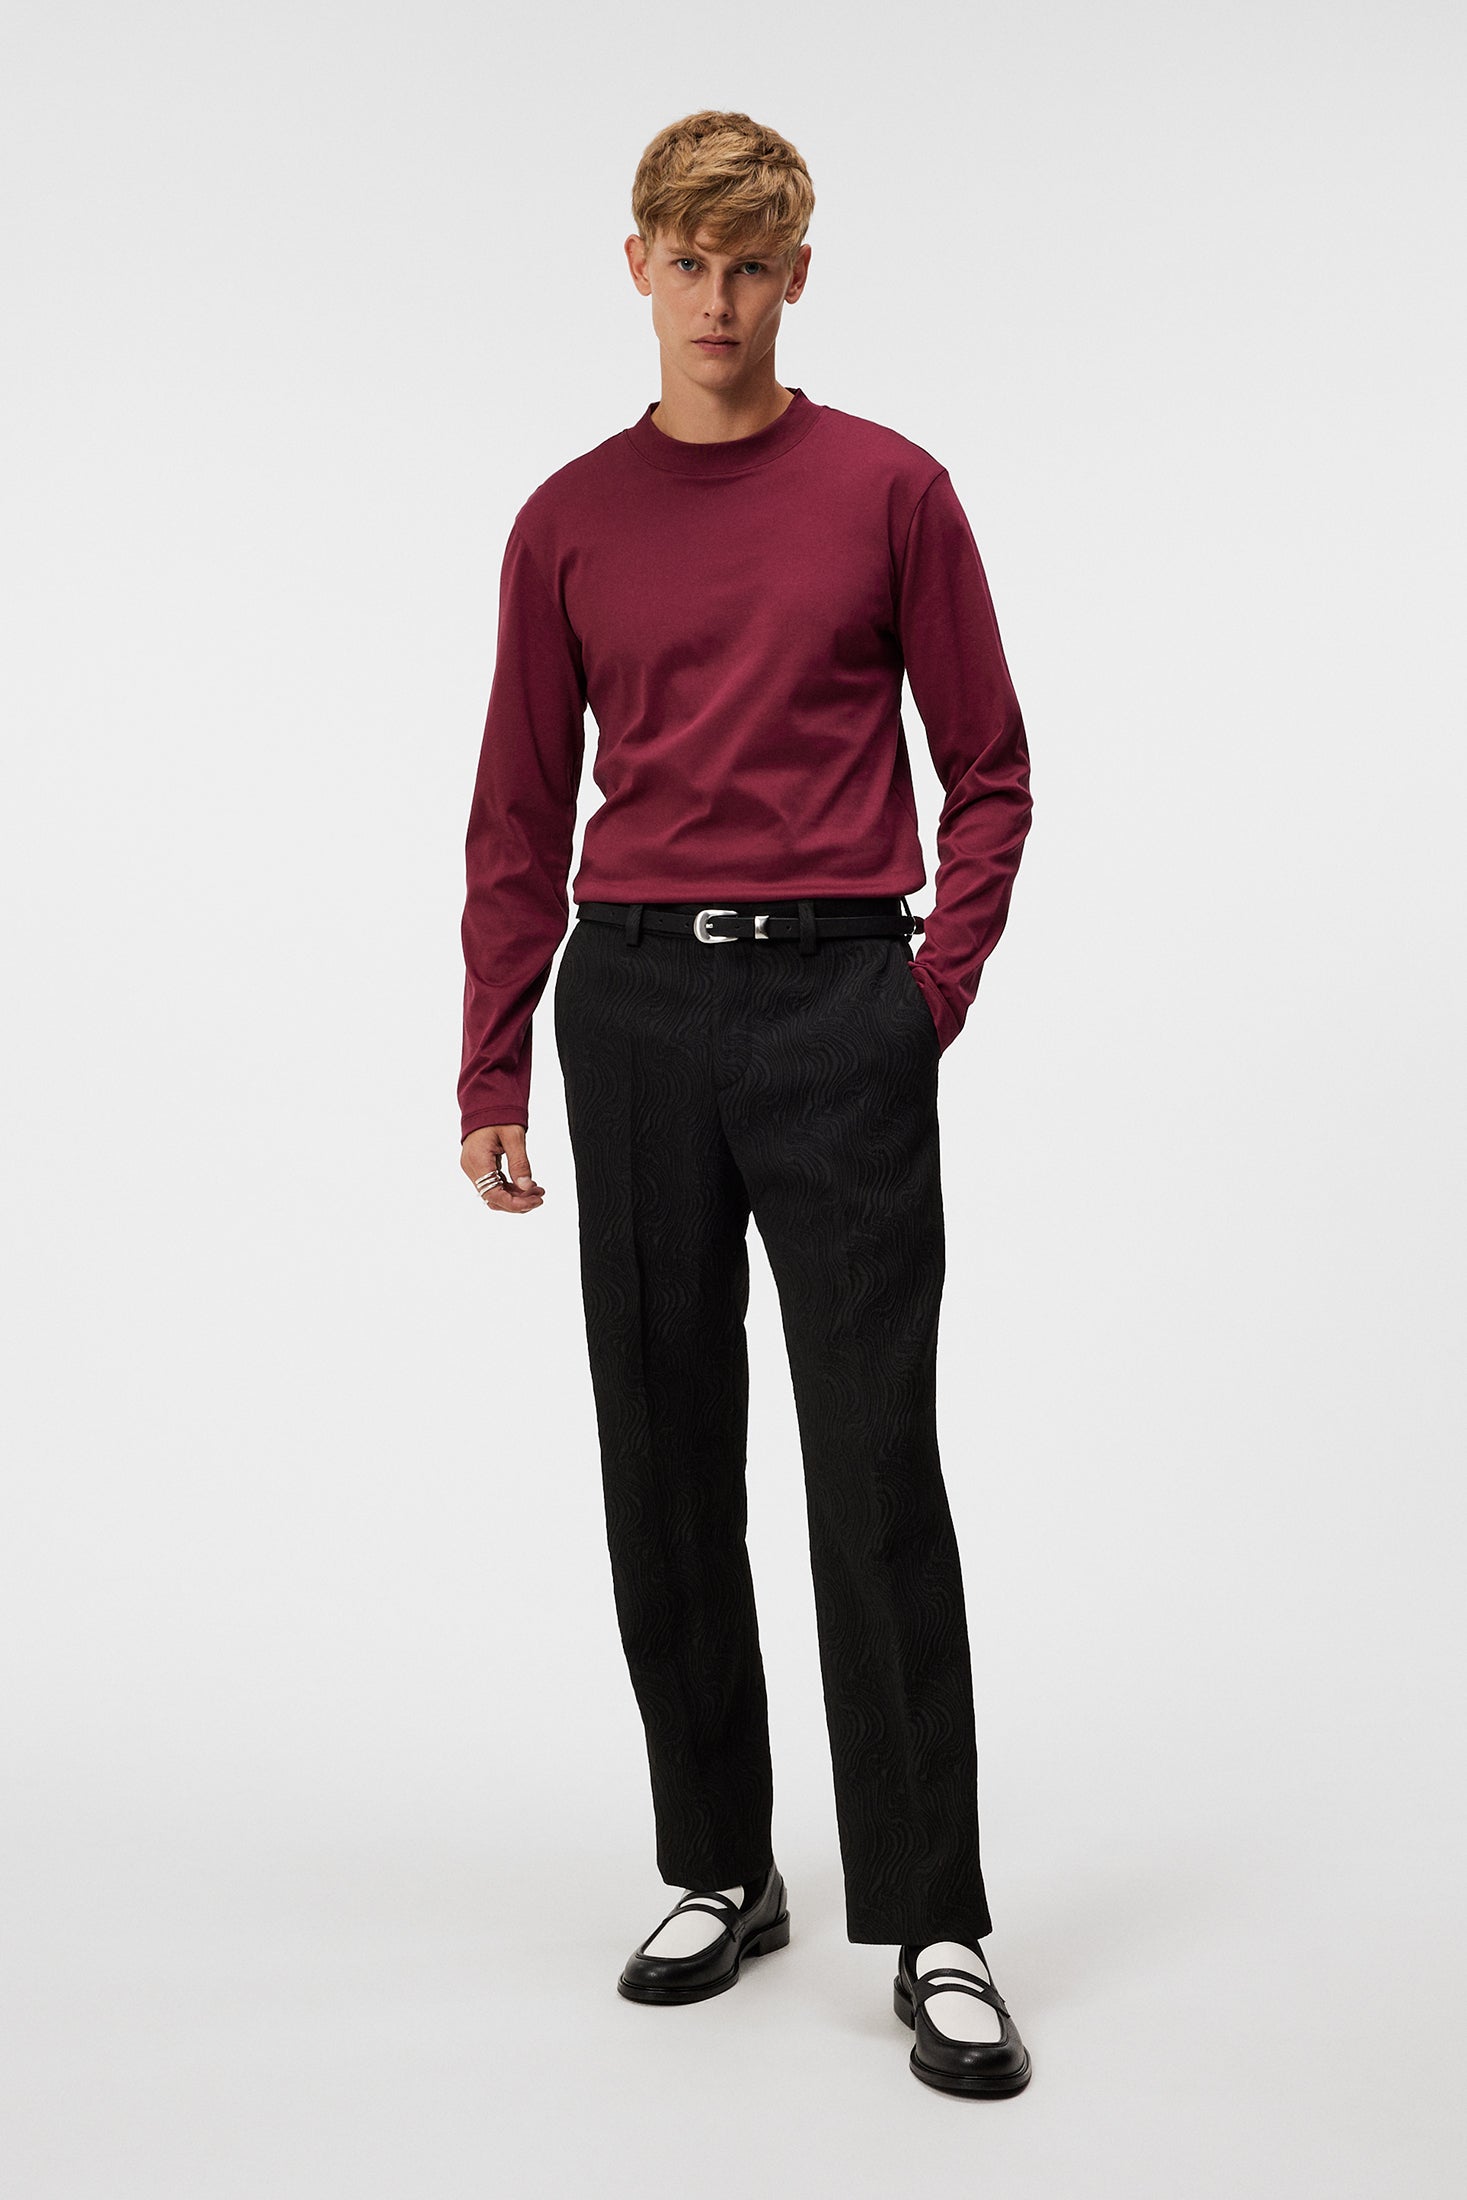 Men's Red Trousers | M&S